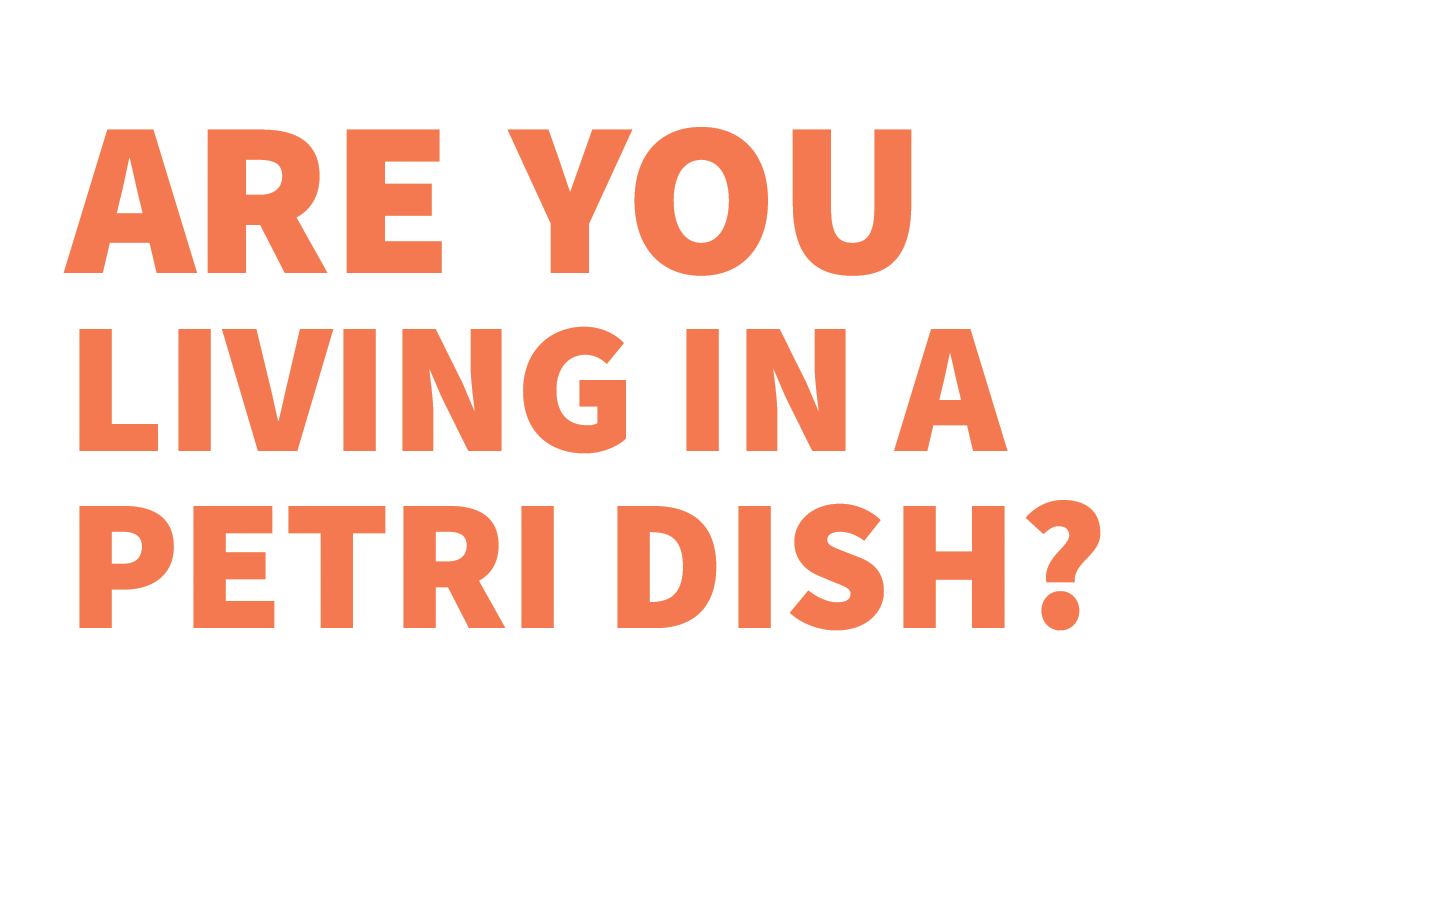 Are you living in a petri dish?